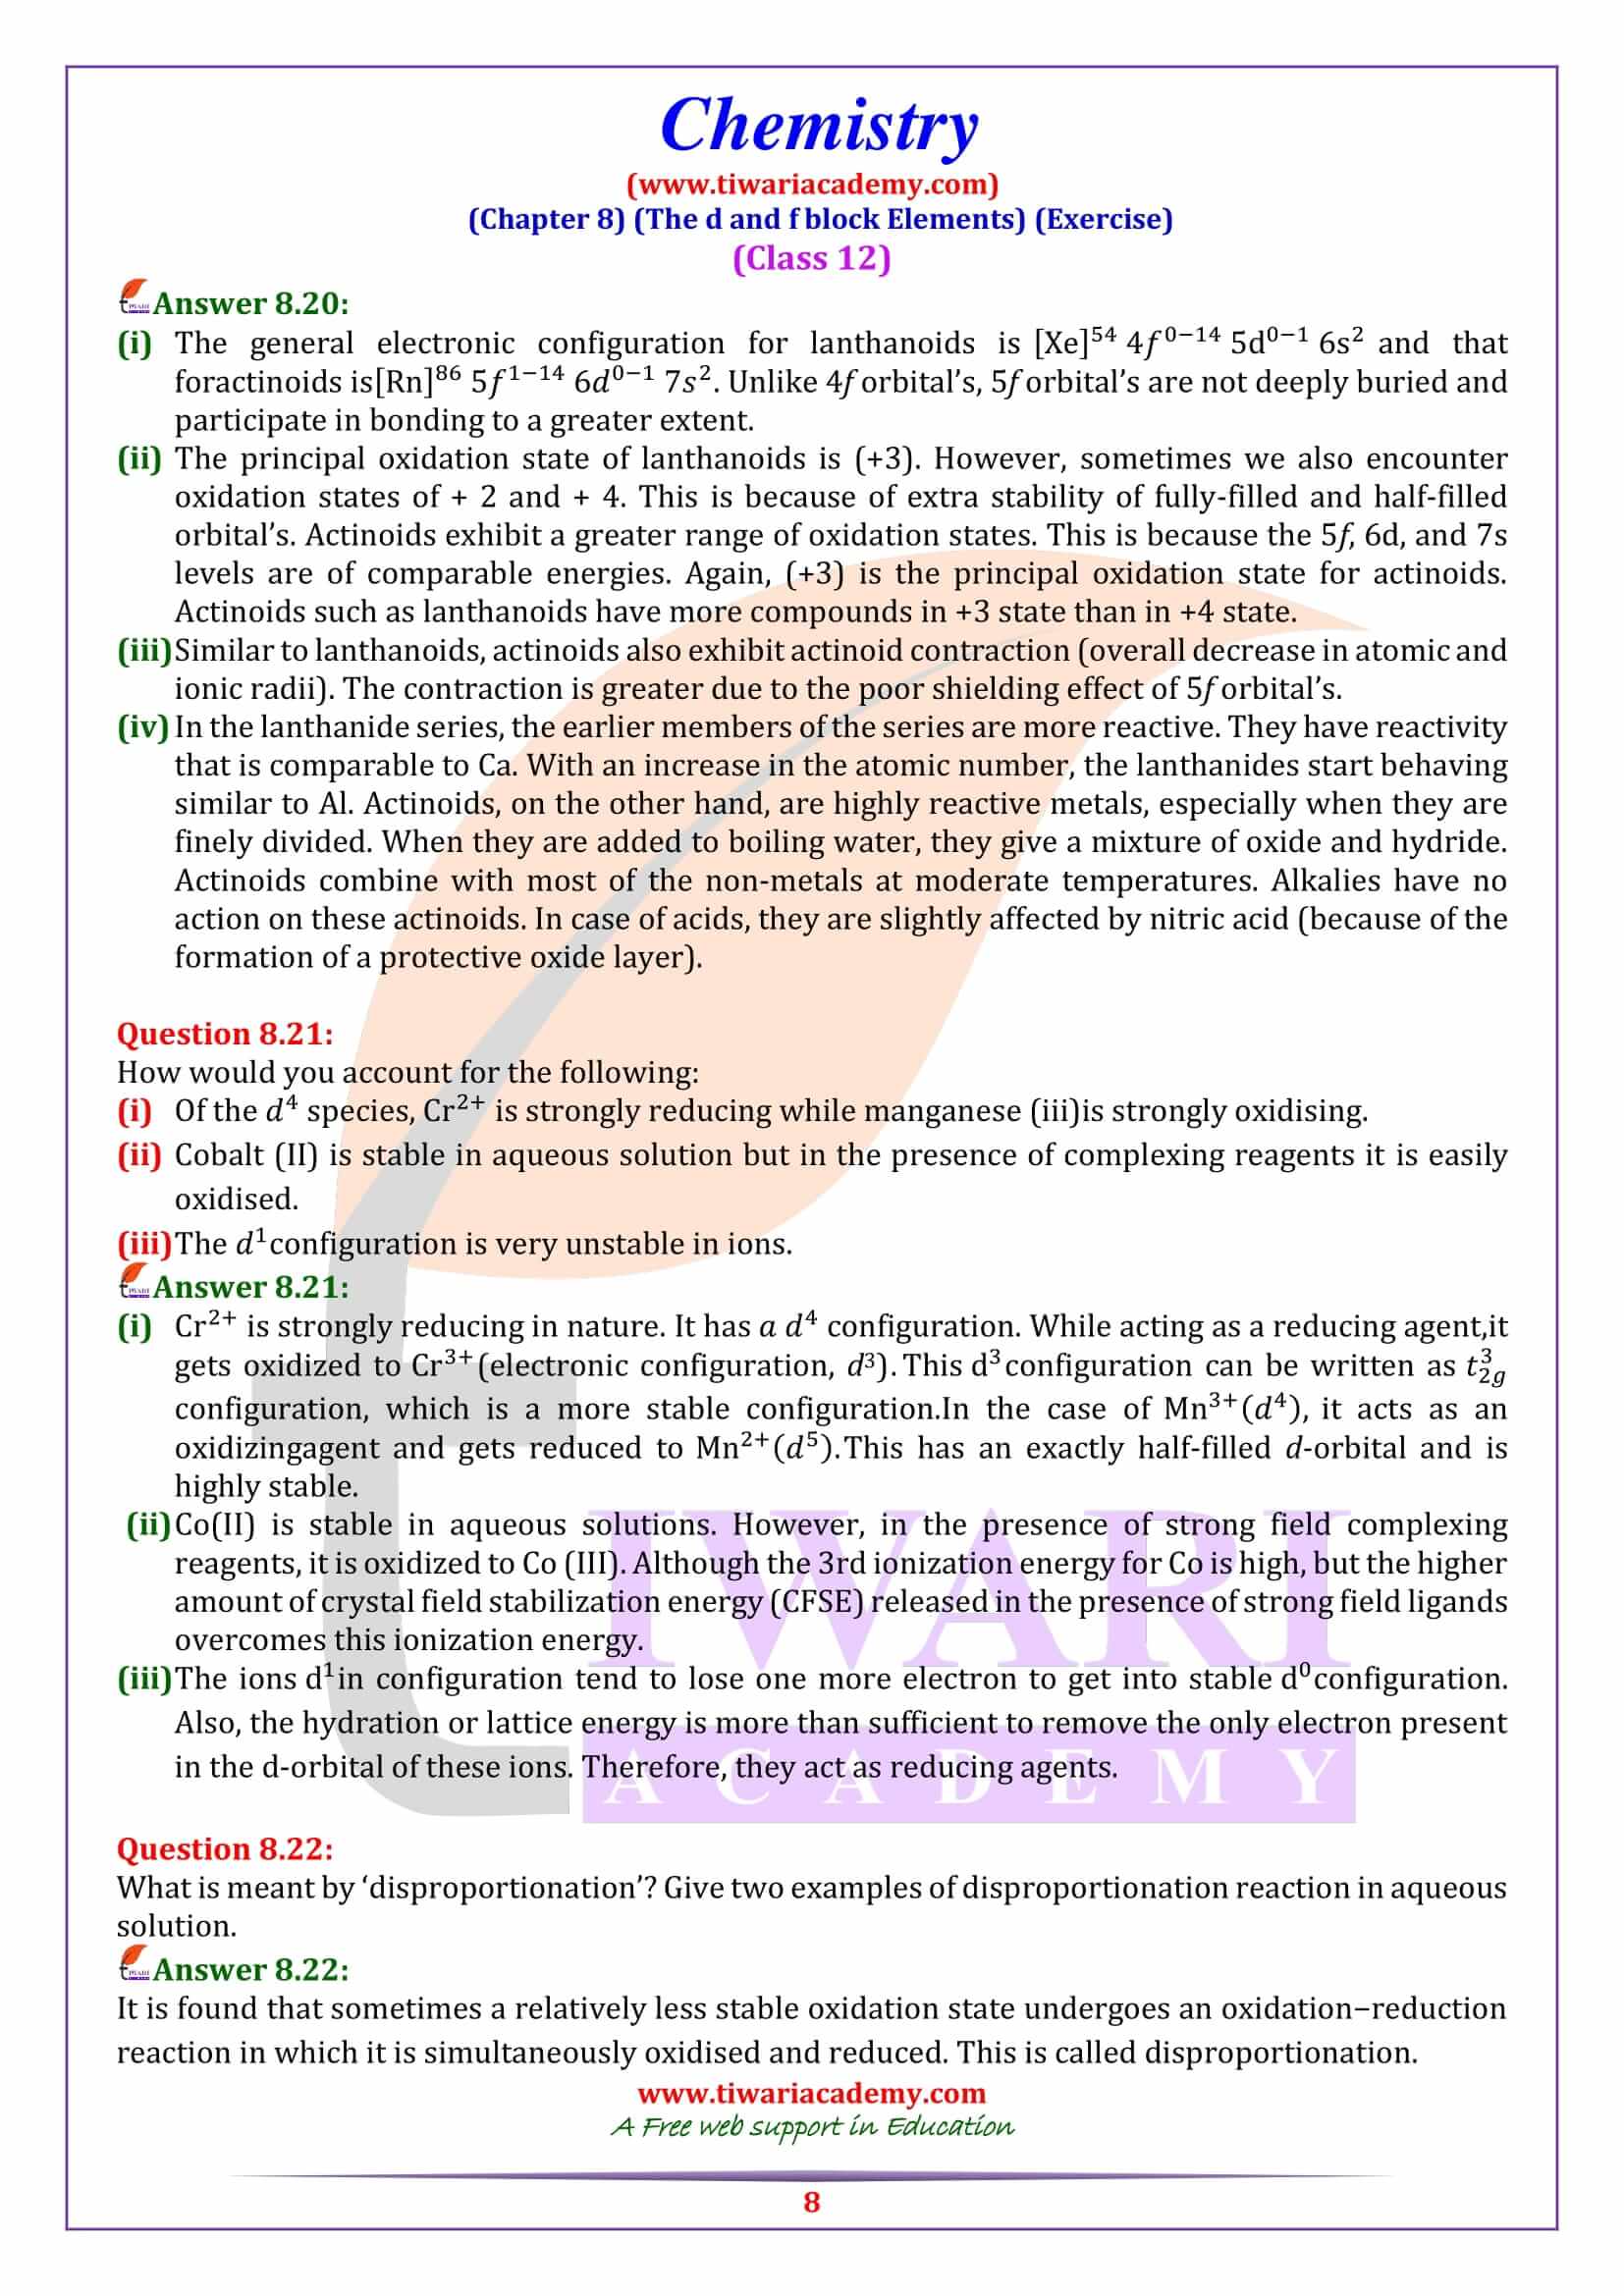 NCERT Solutions for Class 12 Chemistry Chapter 8 download